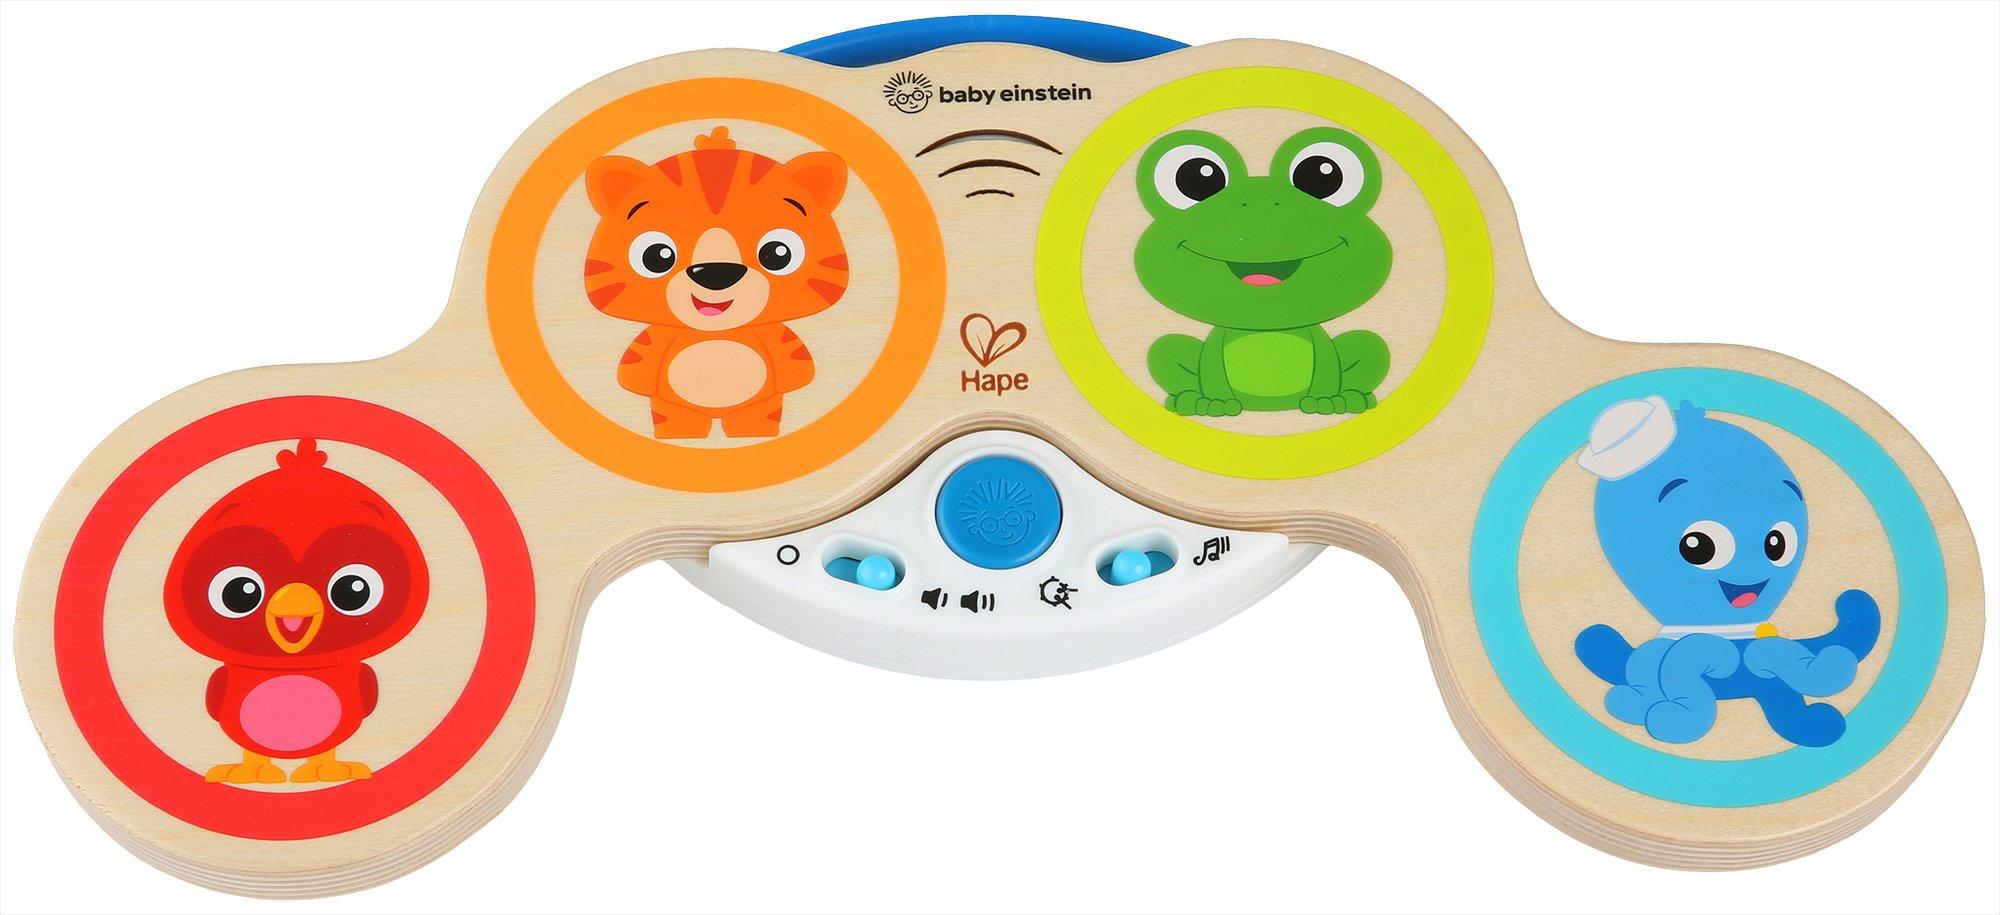 Magic Technology Drums Toys